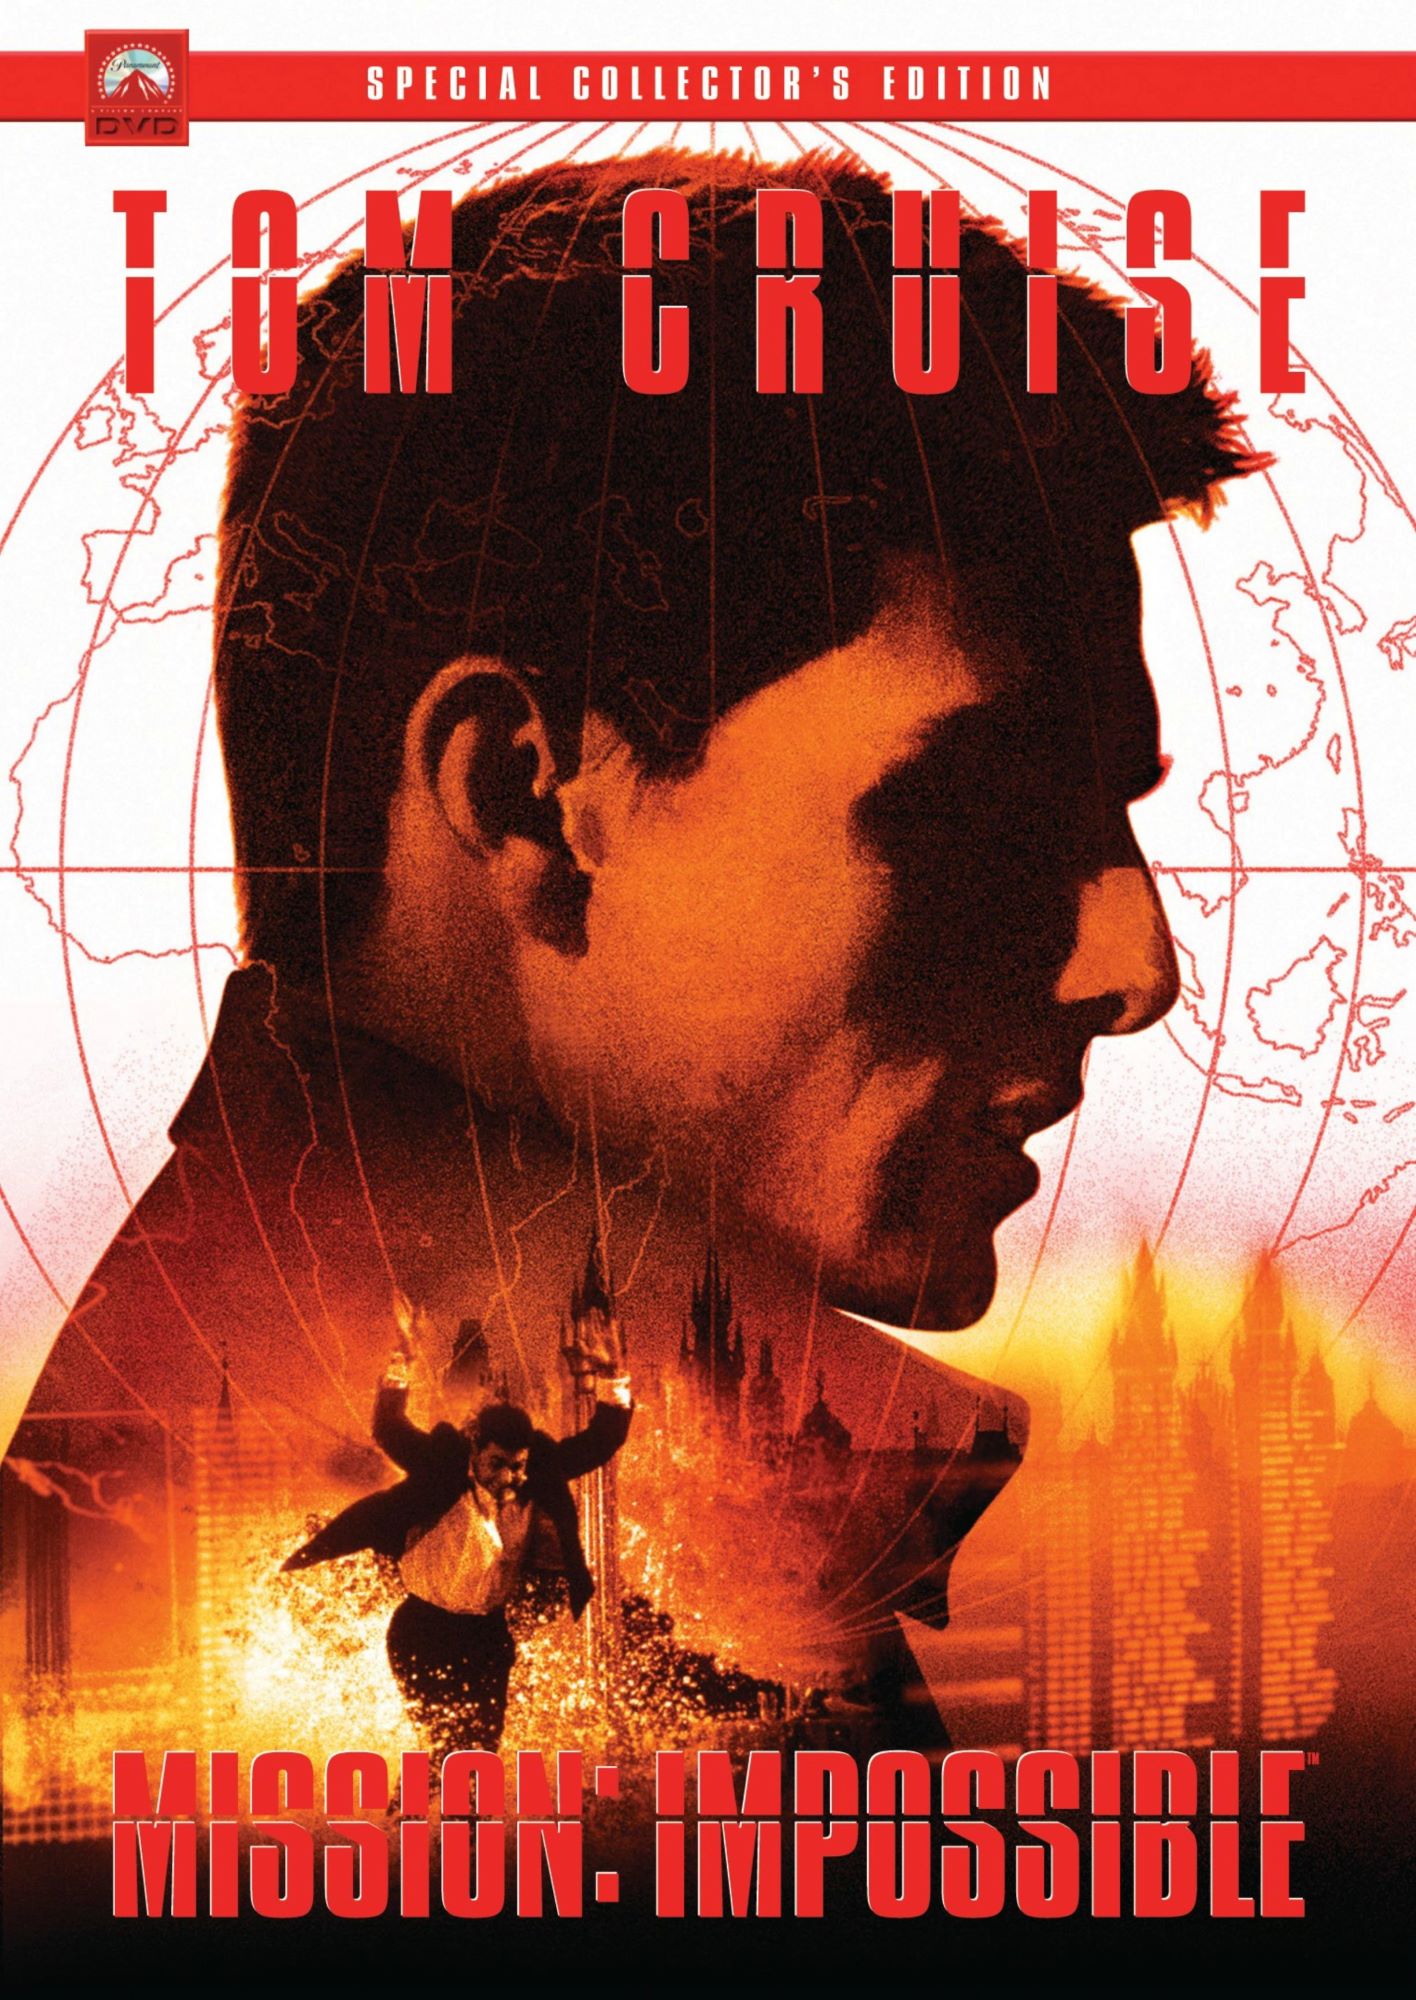 Mission Impossible book cover